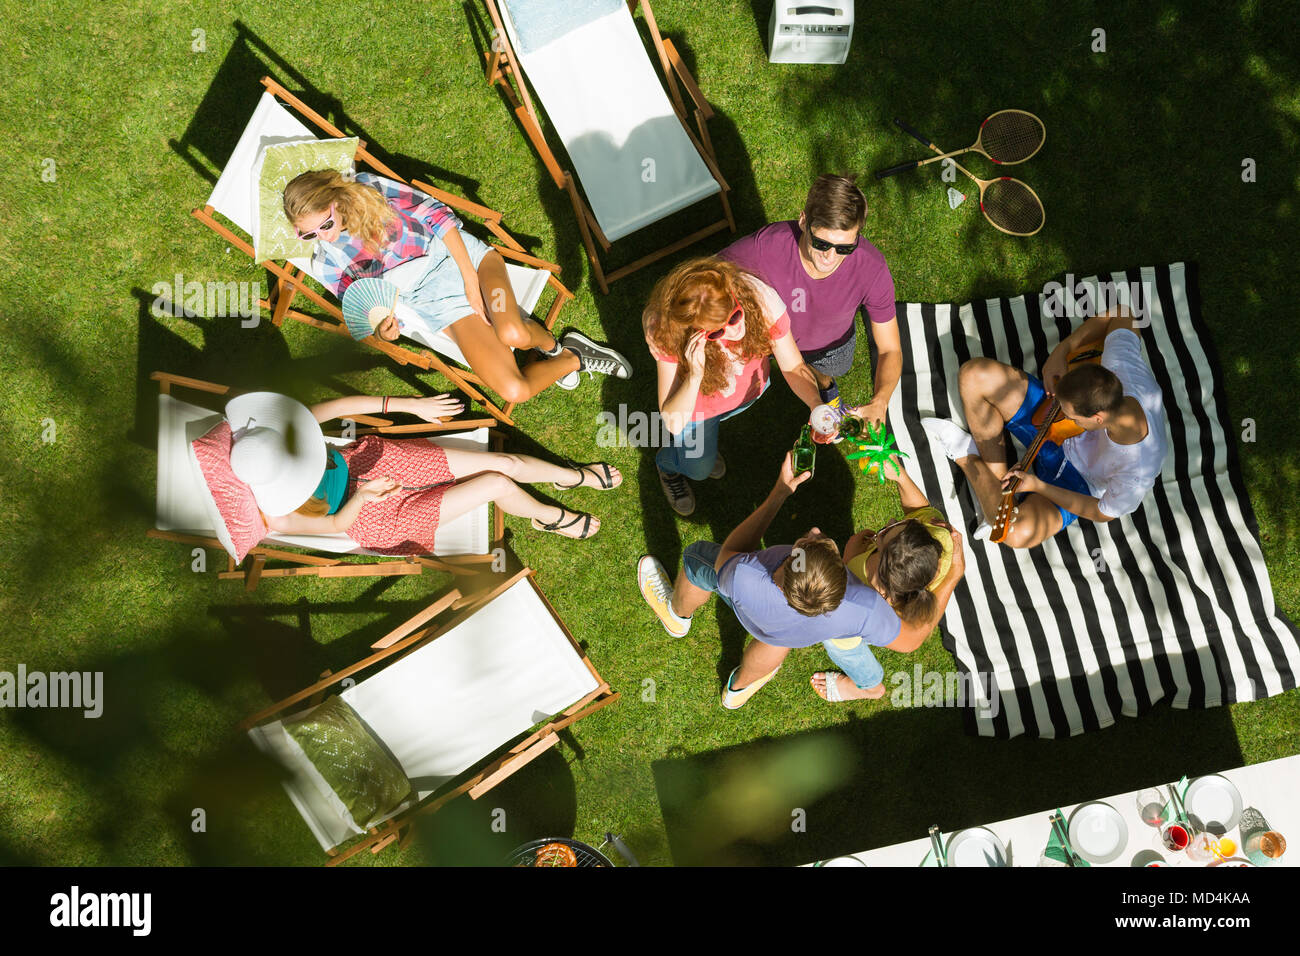 Top view of group of friends enjoying summertime garden party in the countryside, sitting on deck chairs, talking and sunbathing surrounded by nature Stock Photo